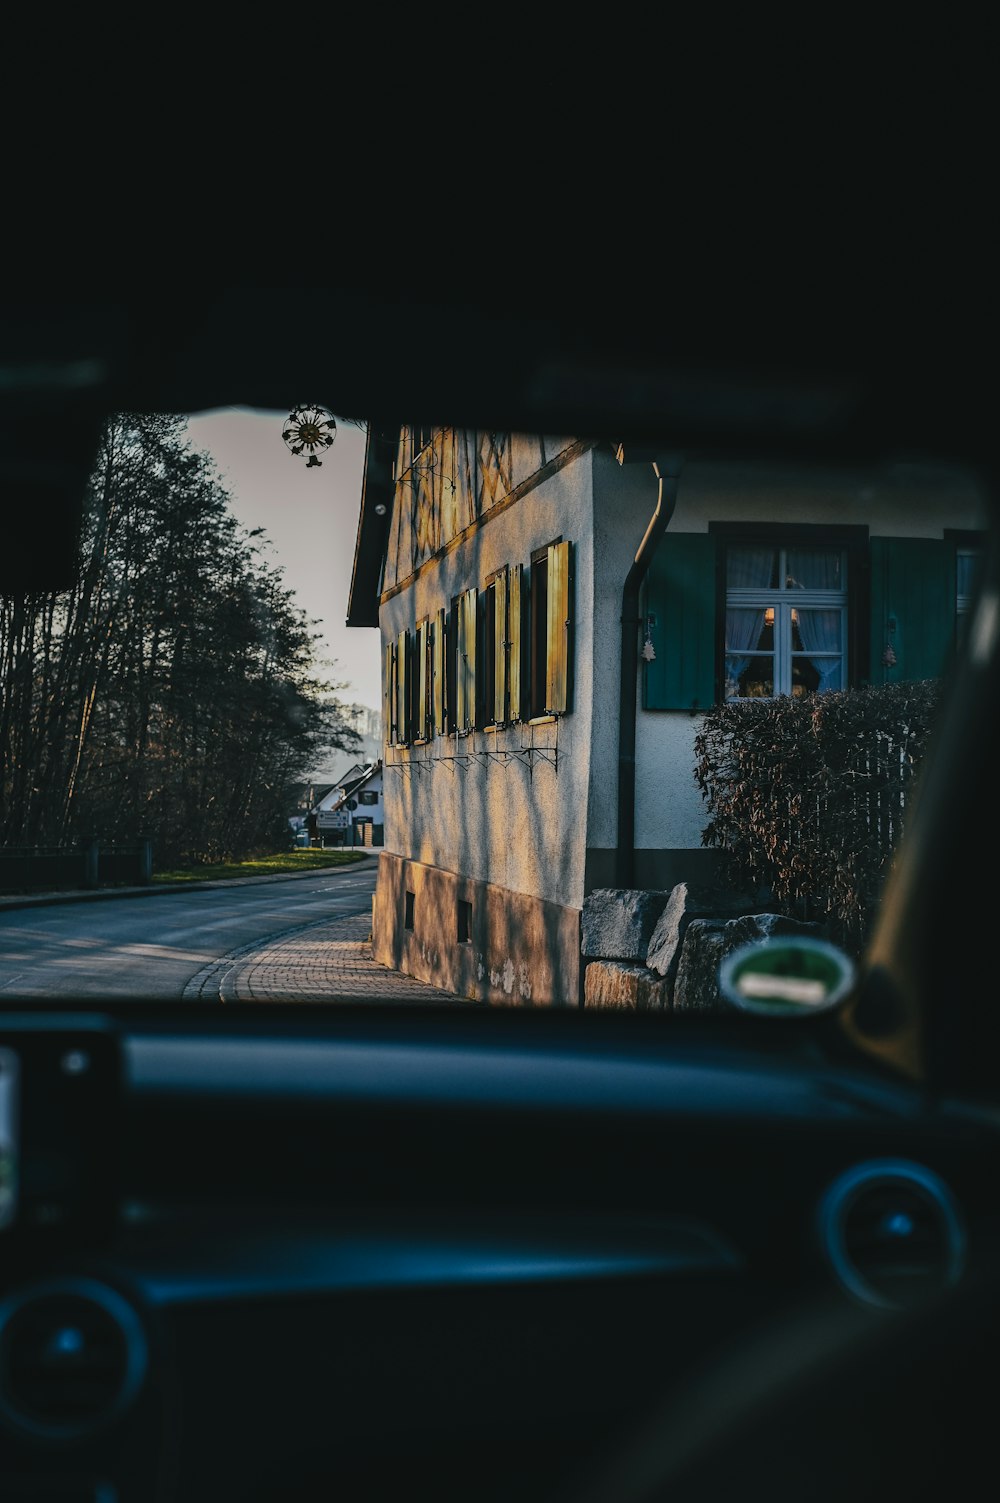 a view of a house from inside a car